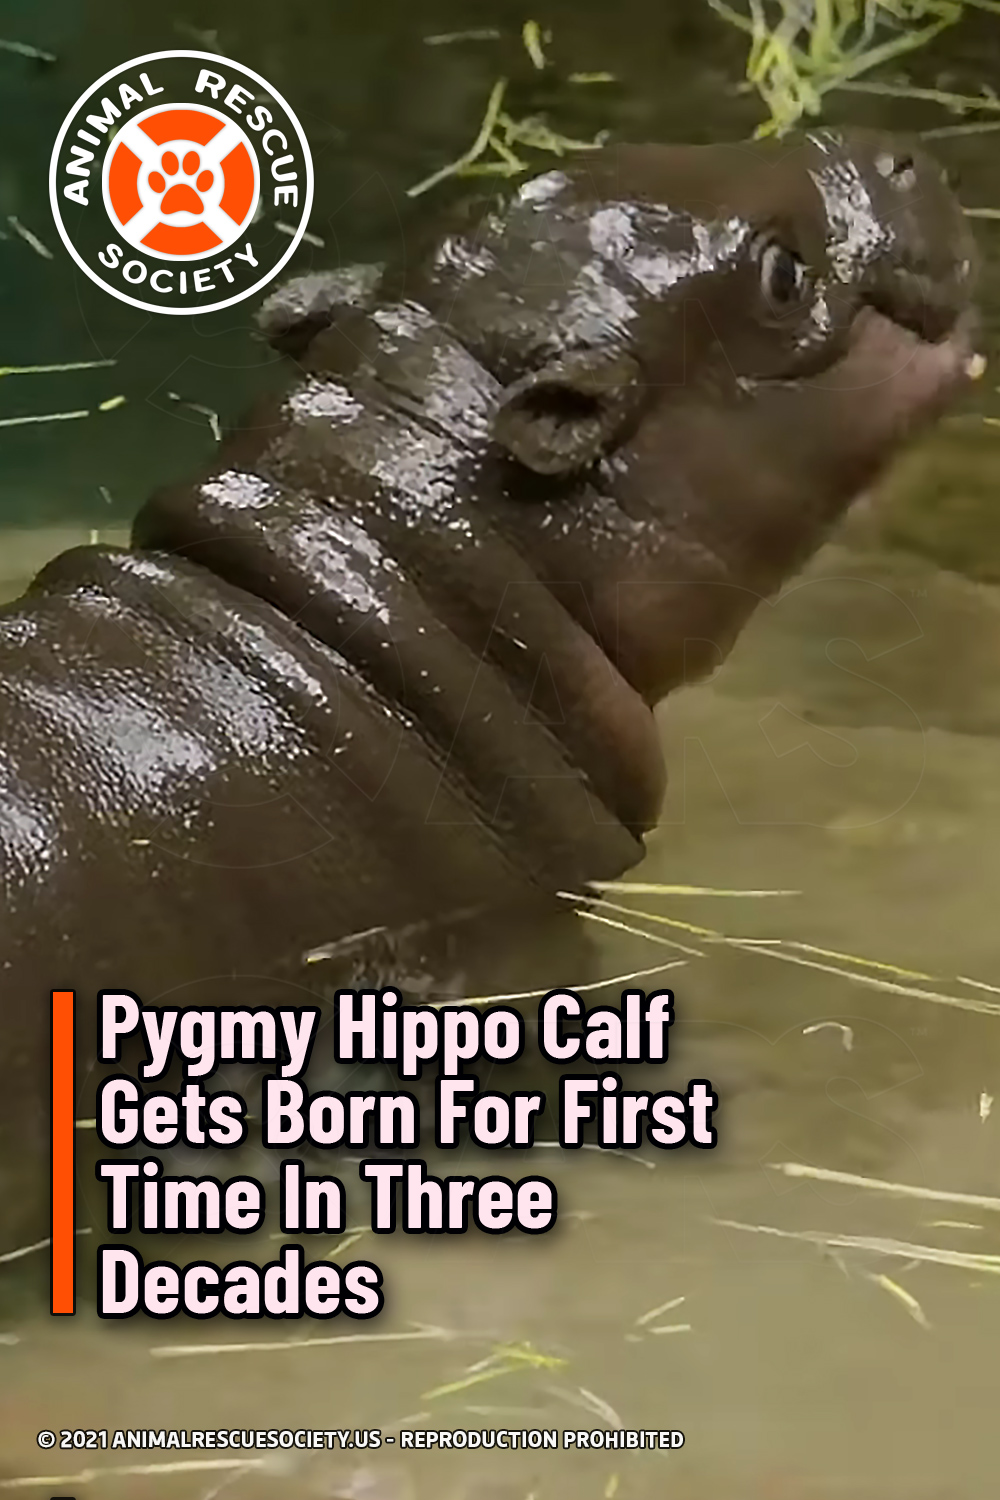 Pygmy Hippo Calf Gets Born For First Time In Three Decades